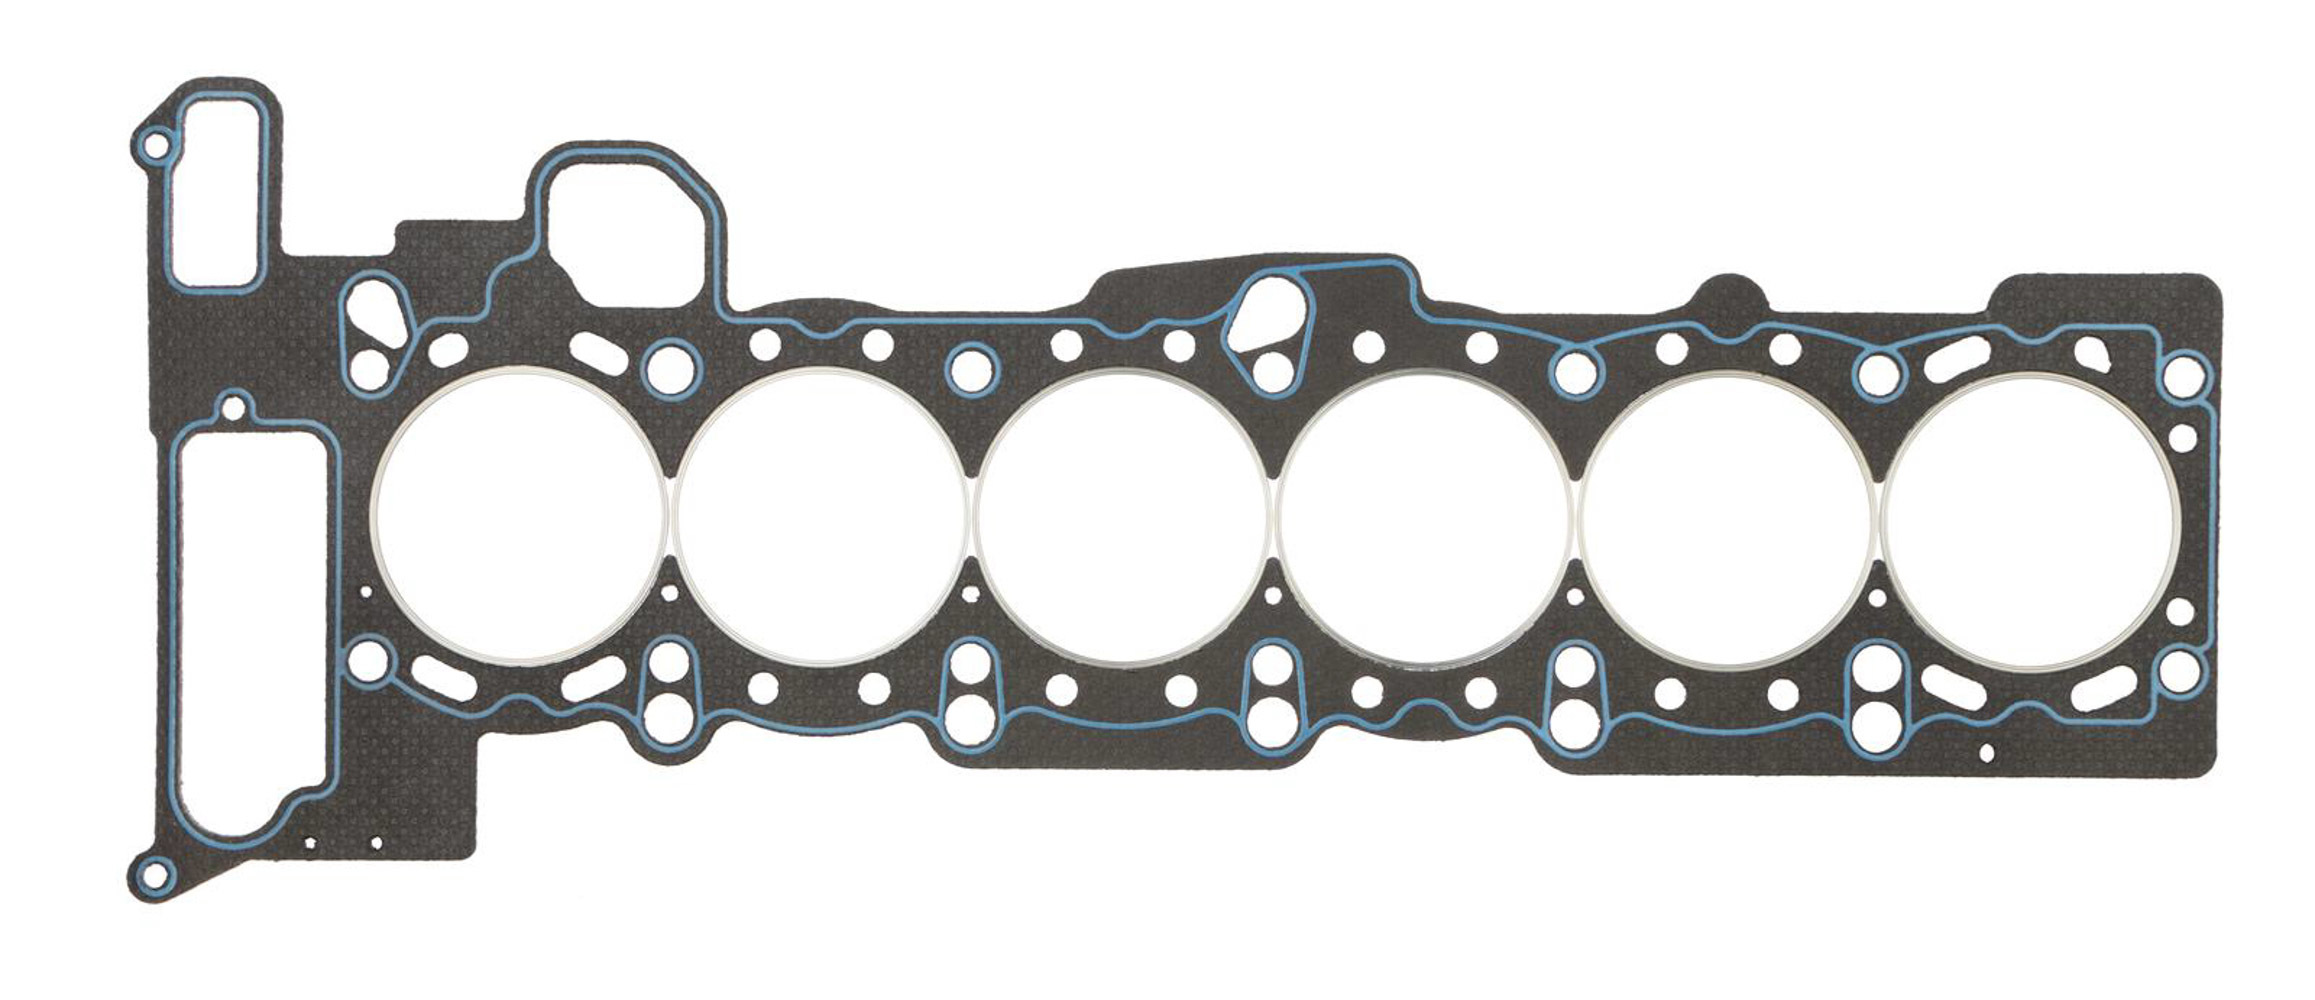 SCE Gaskets CR330022 - Cylinder Head Gasket, Vulcan Cut Ring, 86.00 mm Bore, 1.50 mm Compression Thickness, Steel Core Laminate, BMW Inline-6, Each